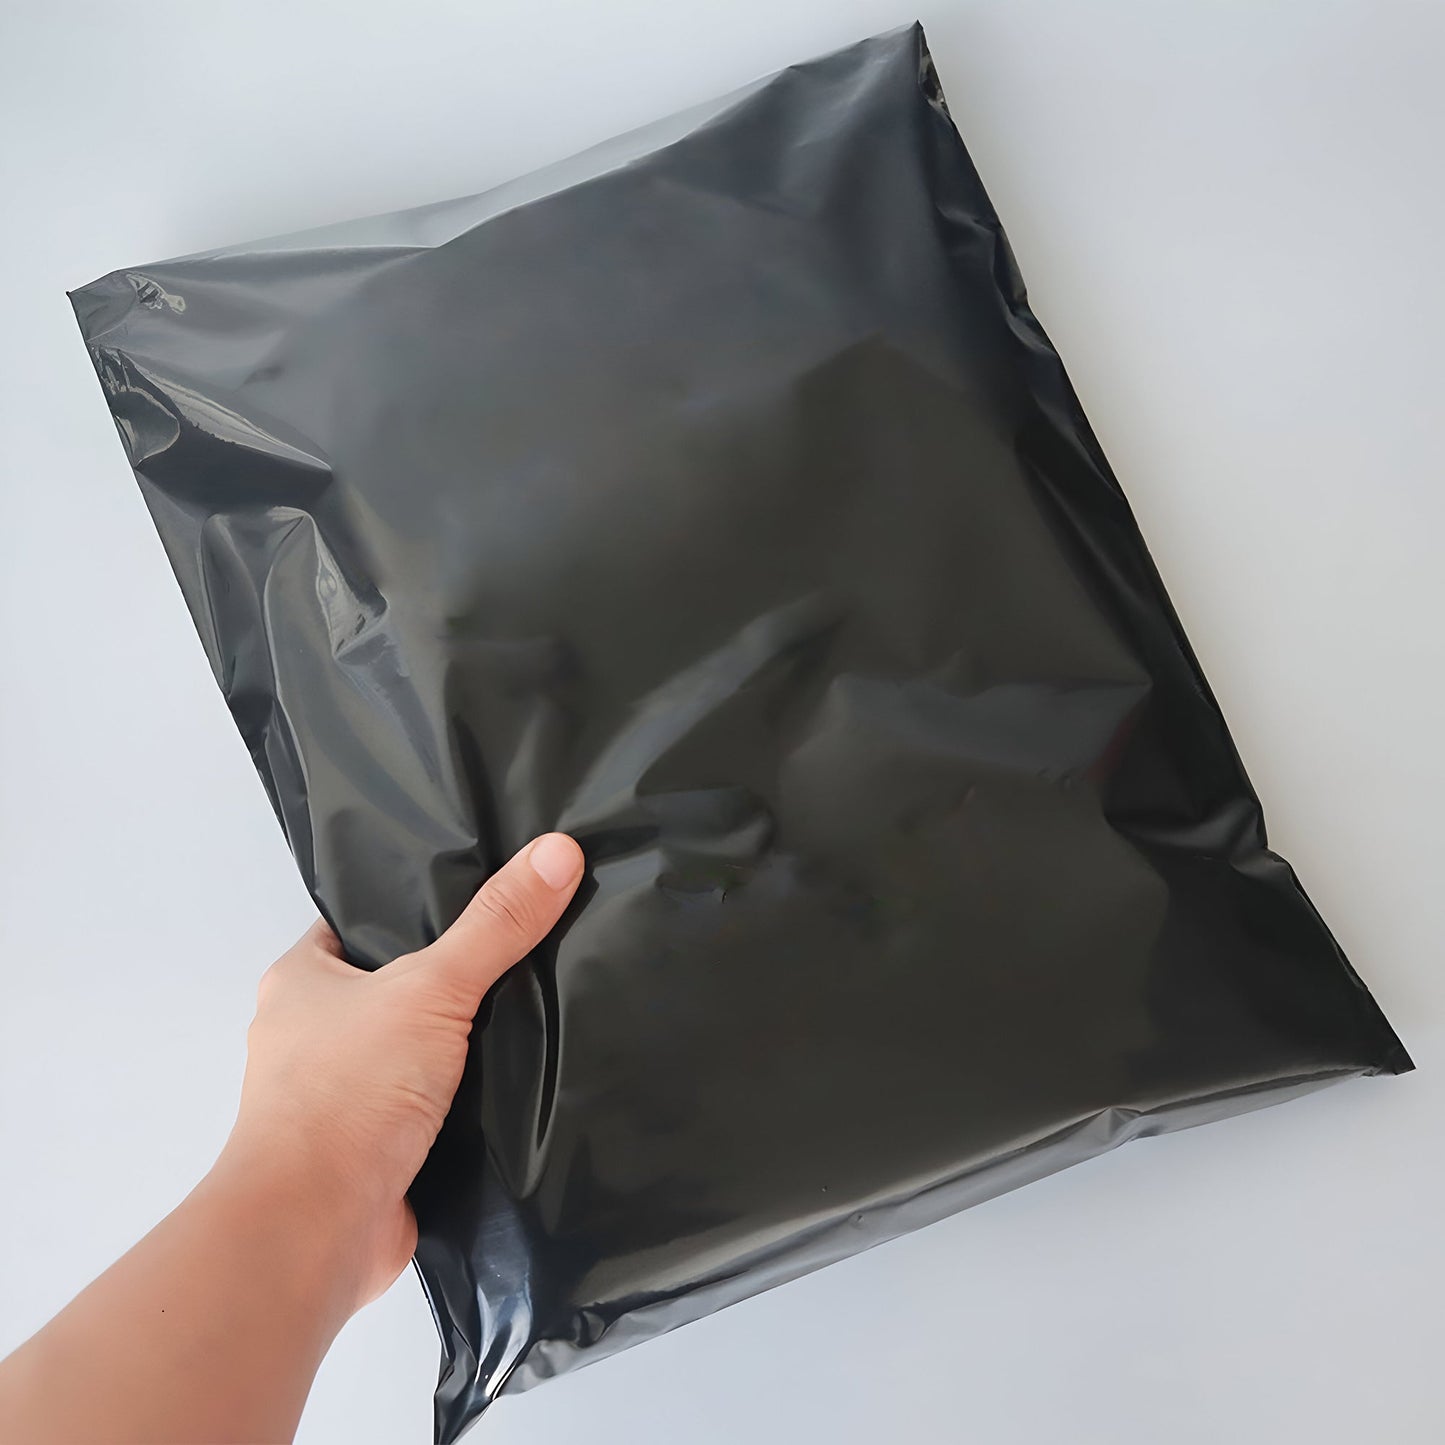 Express Shipping Bag Parcel Poly Mailing 